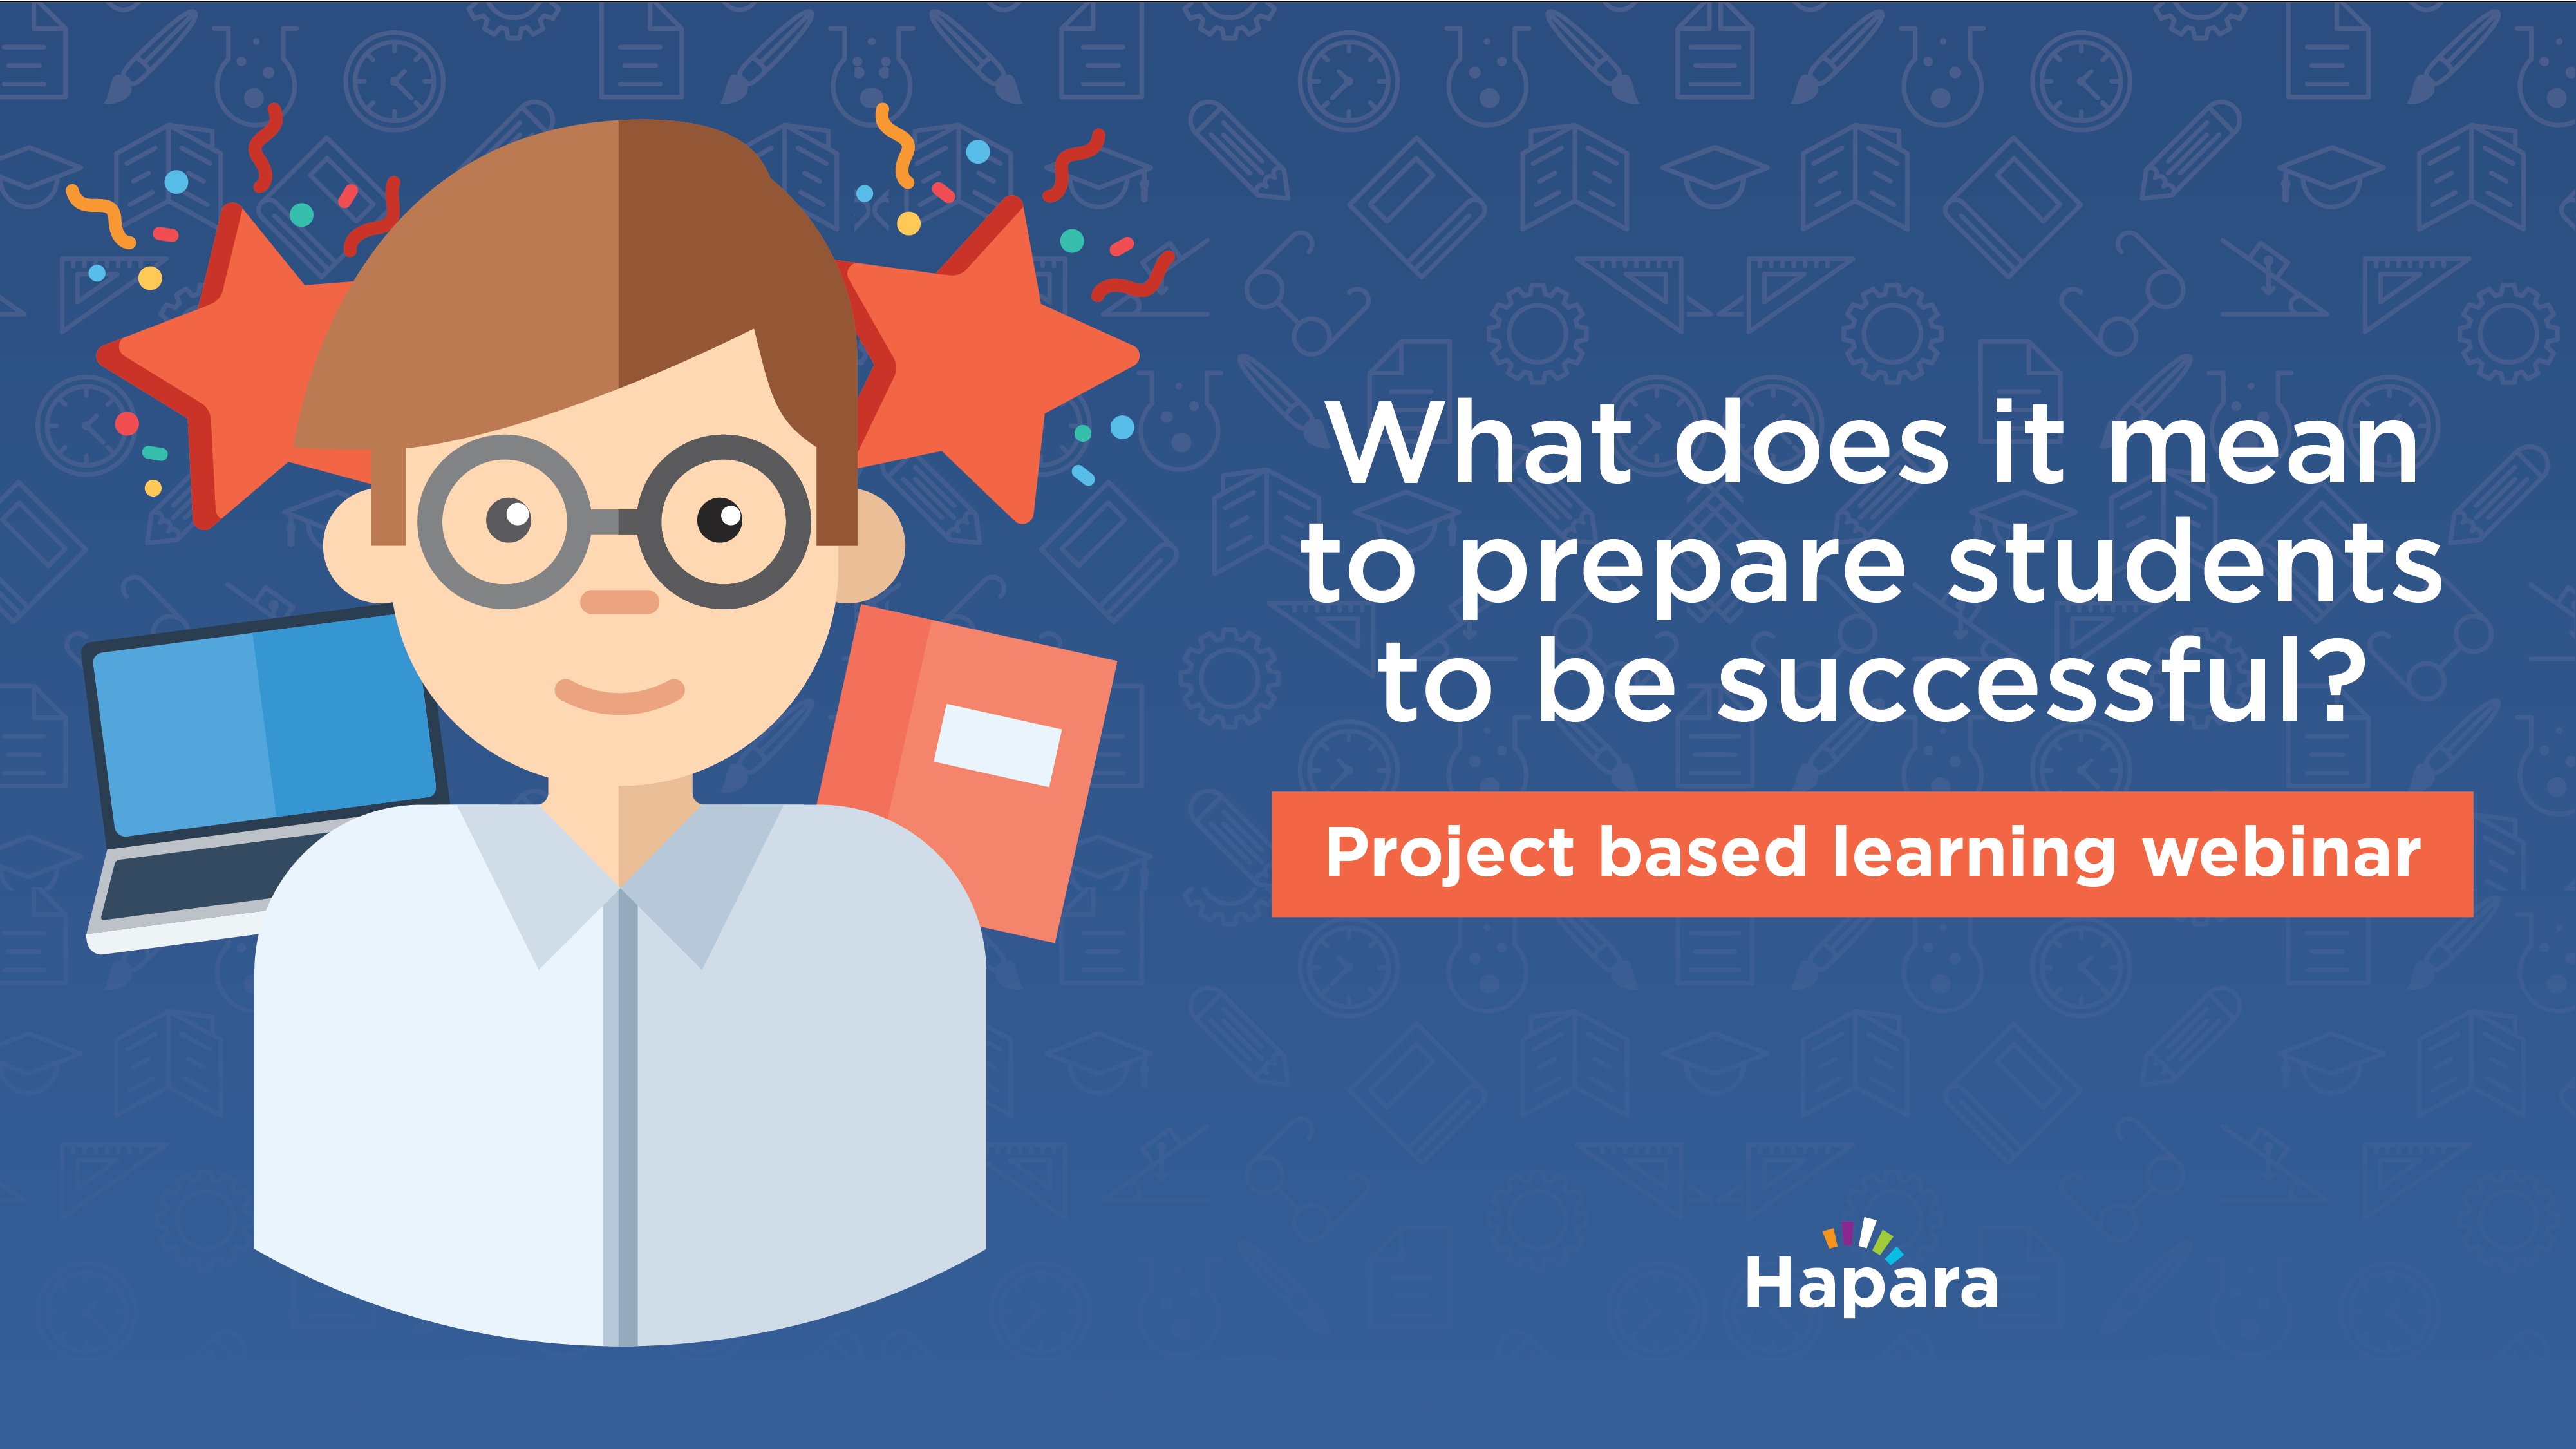 What does it mean to prepare students to be successful?